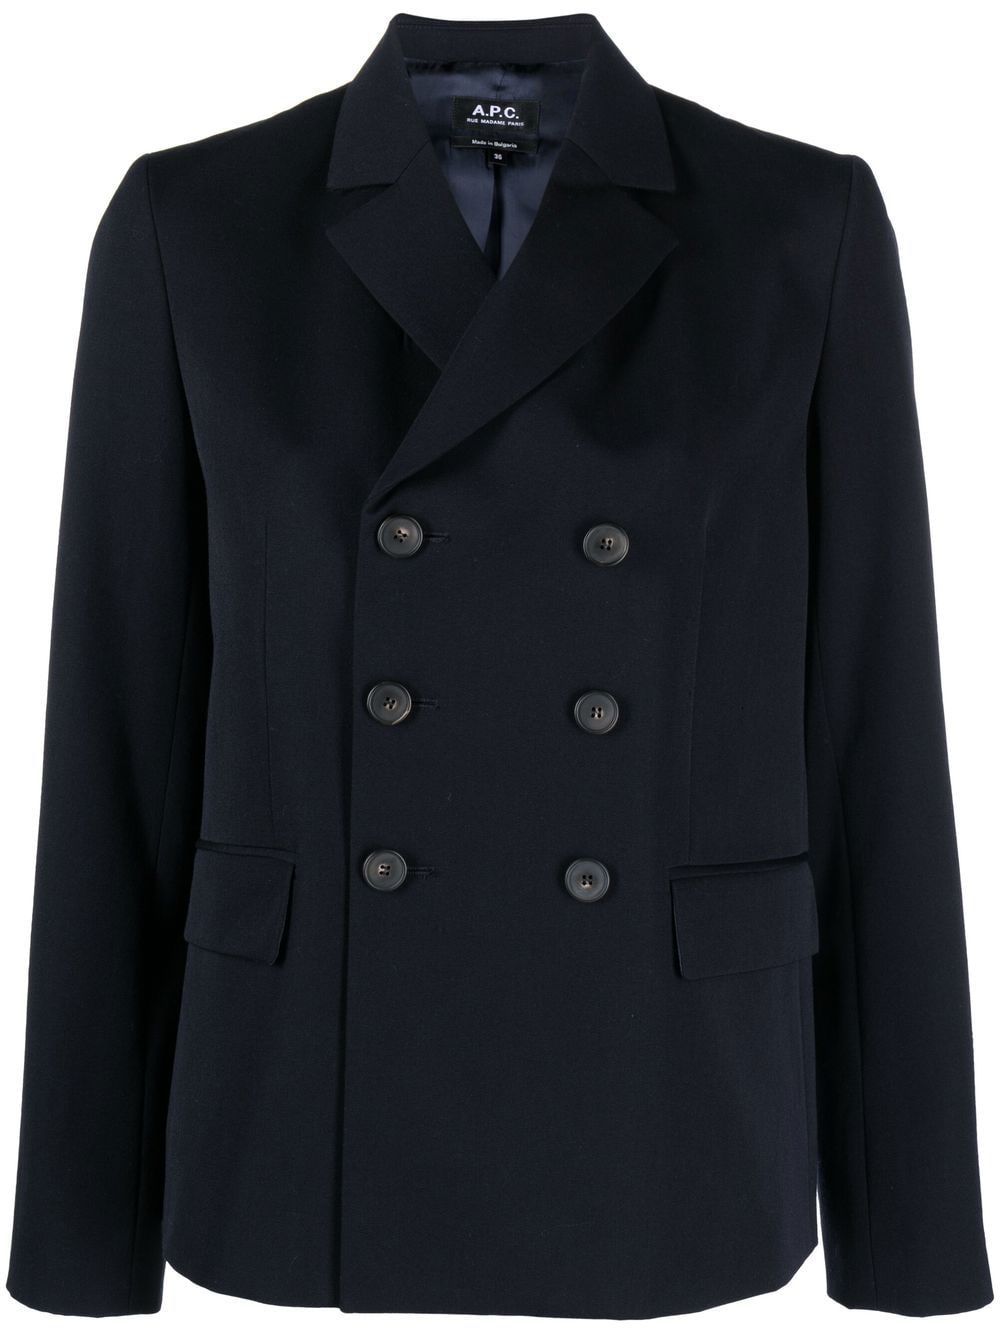 A.P.C. double-breasted jacket - Blue von A.P.C.